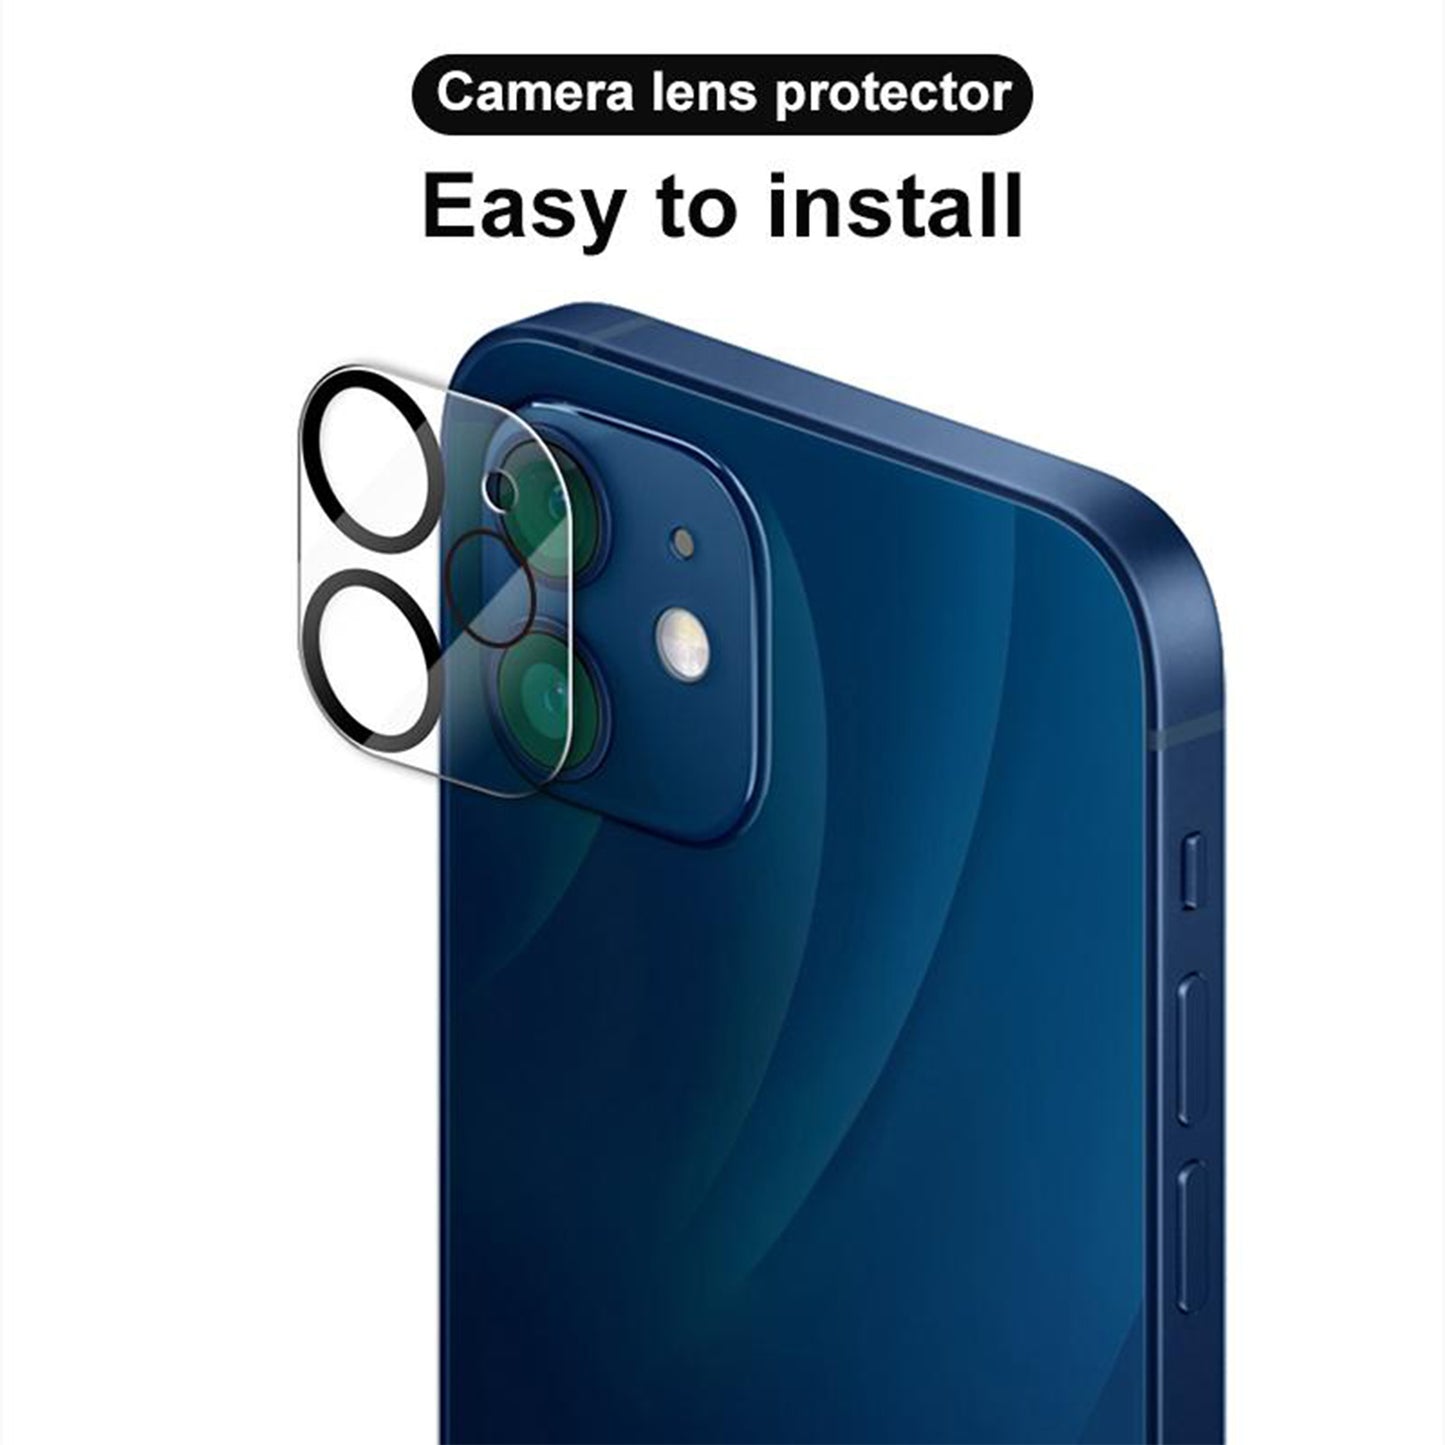 [2 Pack] MEZON Apple iPhone 11 Pro (5.8") Premium Full Coverage Camera Lens Tempered Glass – No Whitening from Flash